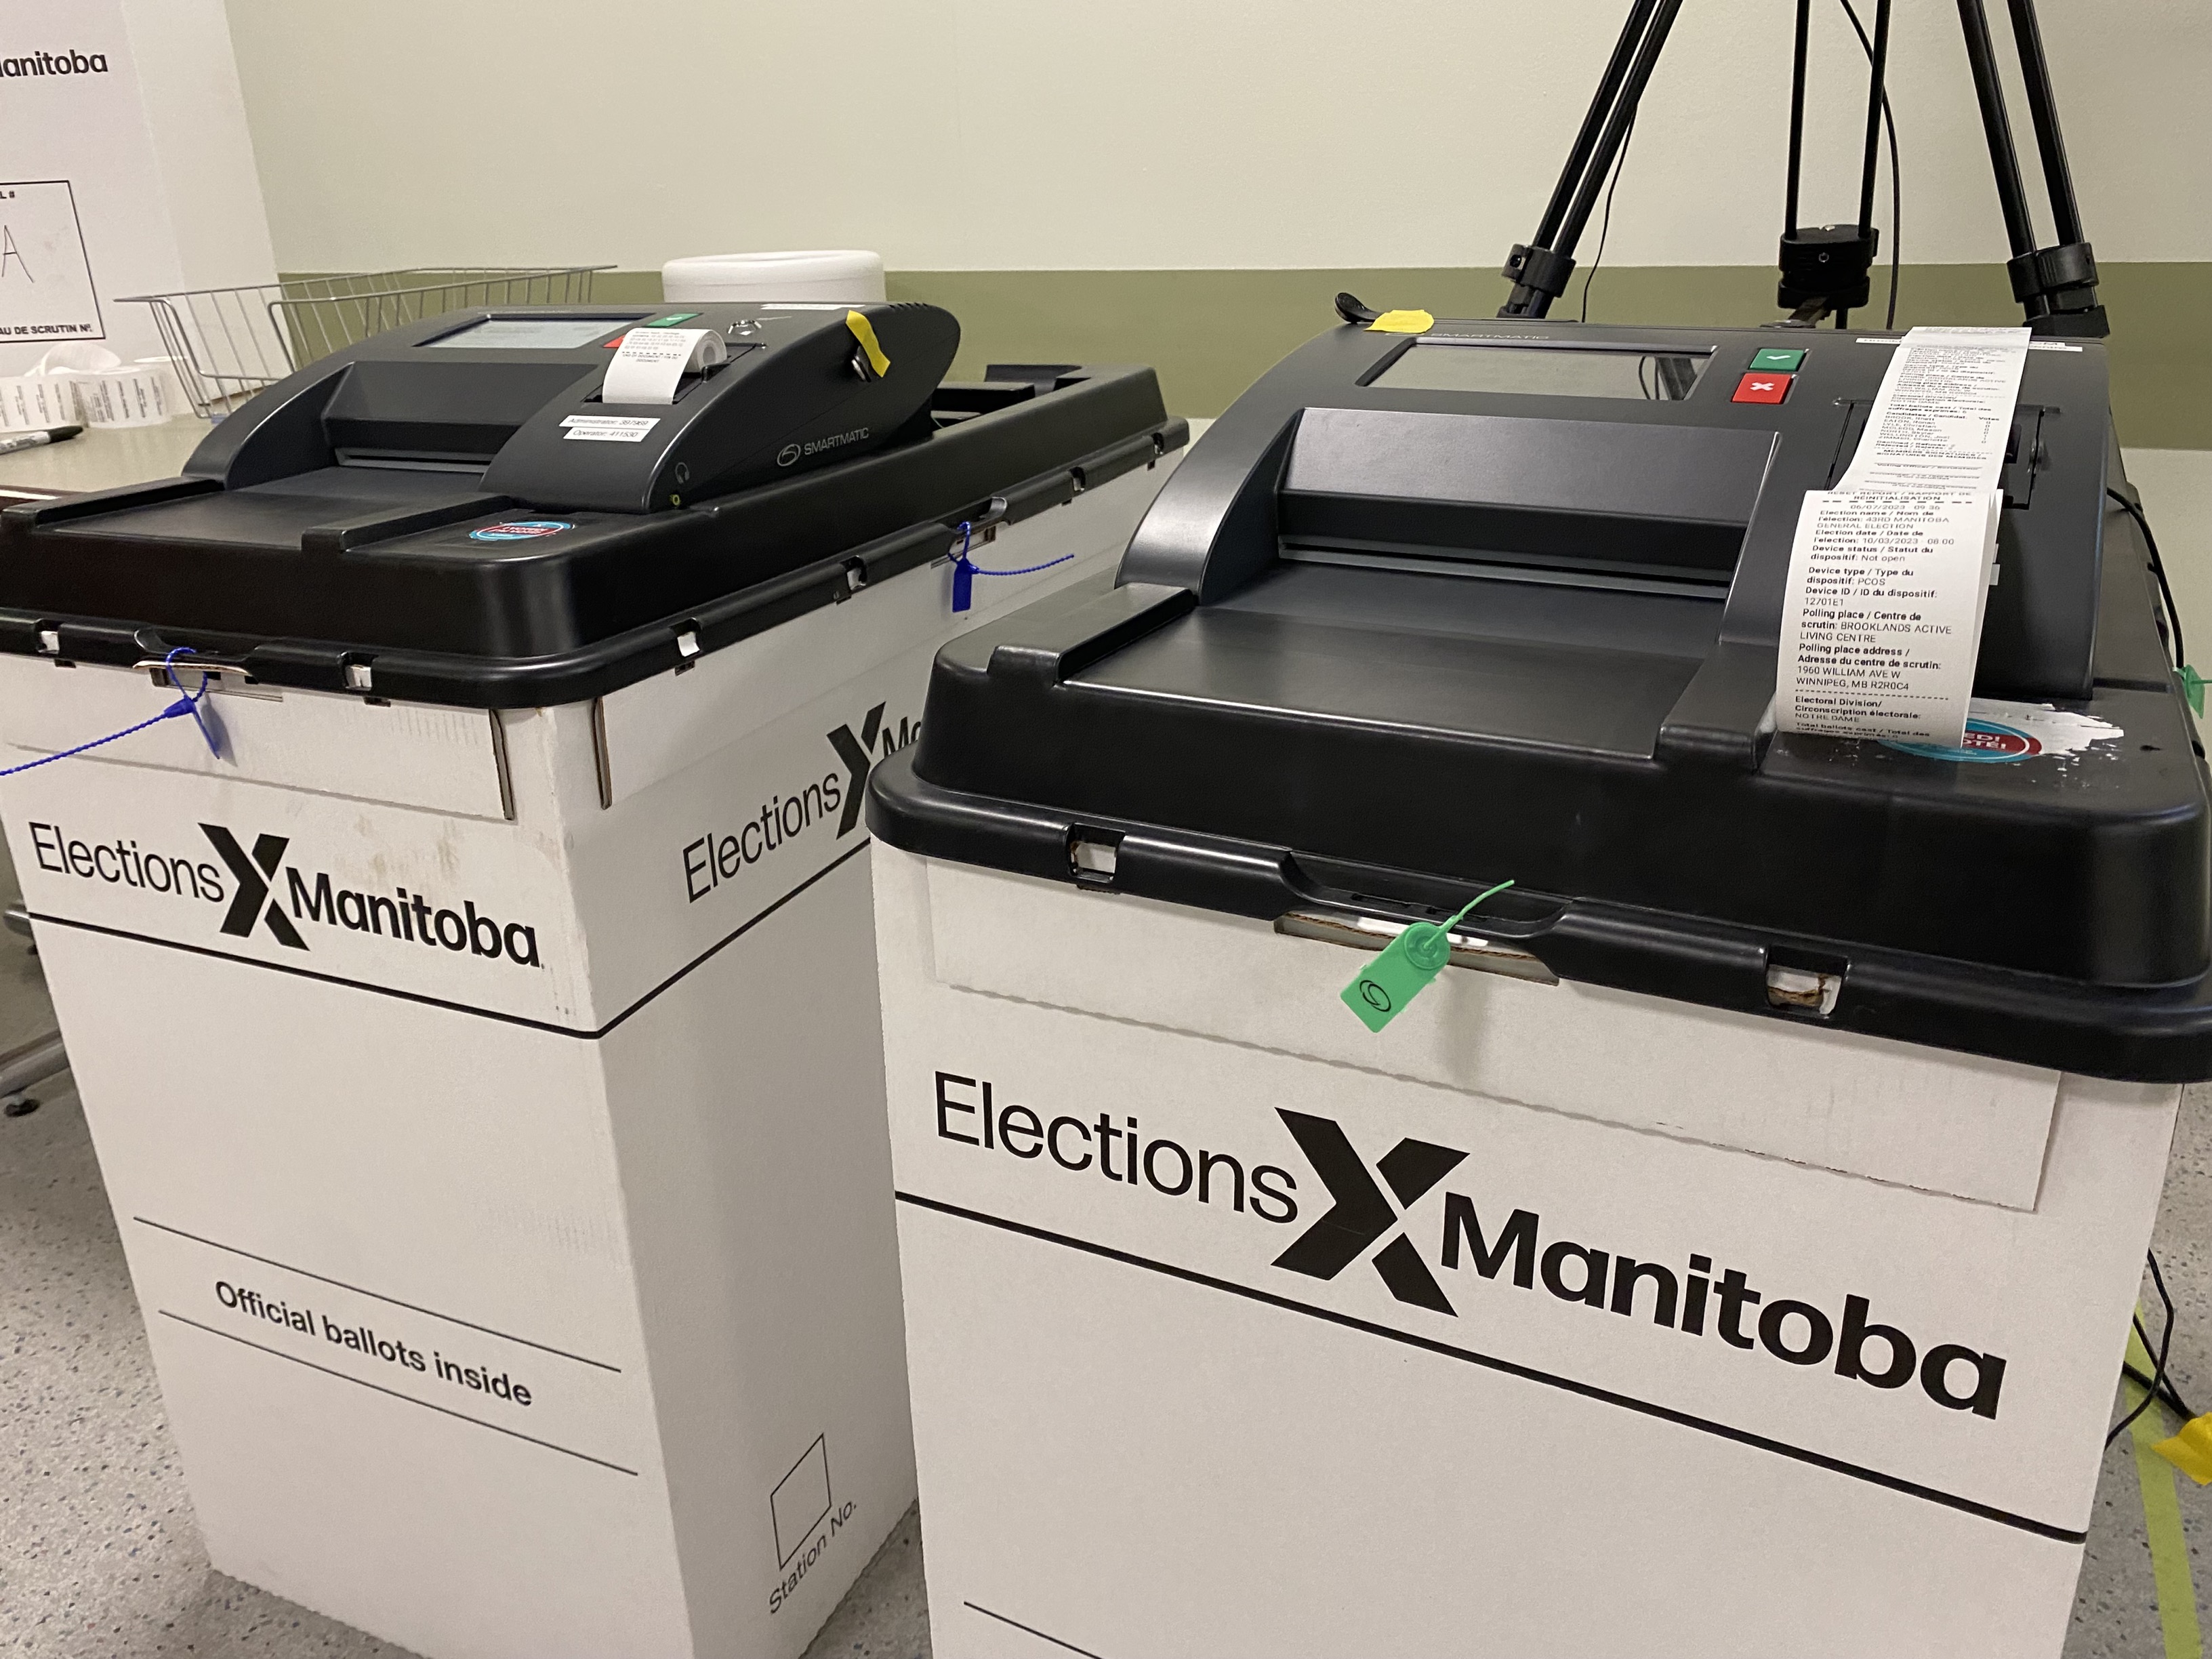 New tools expected to speed up voting process, reporting of results: Elections Manitoba